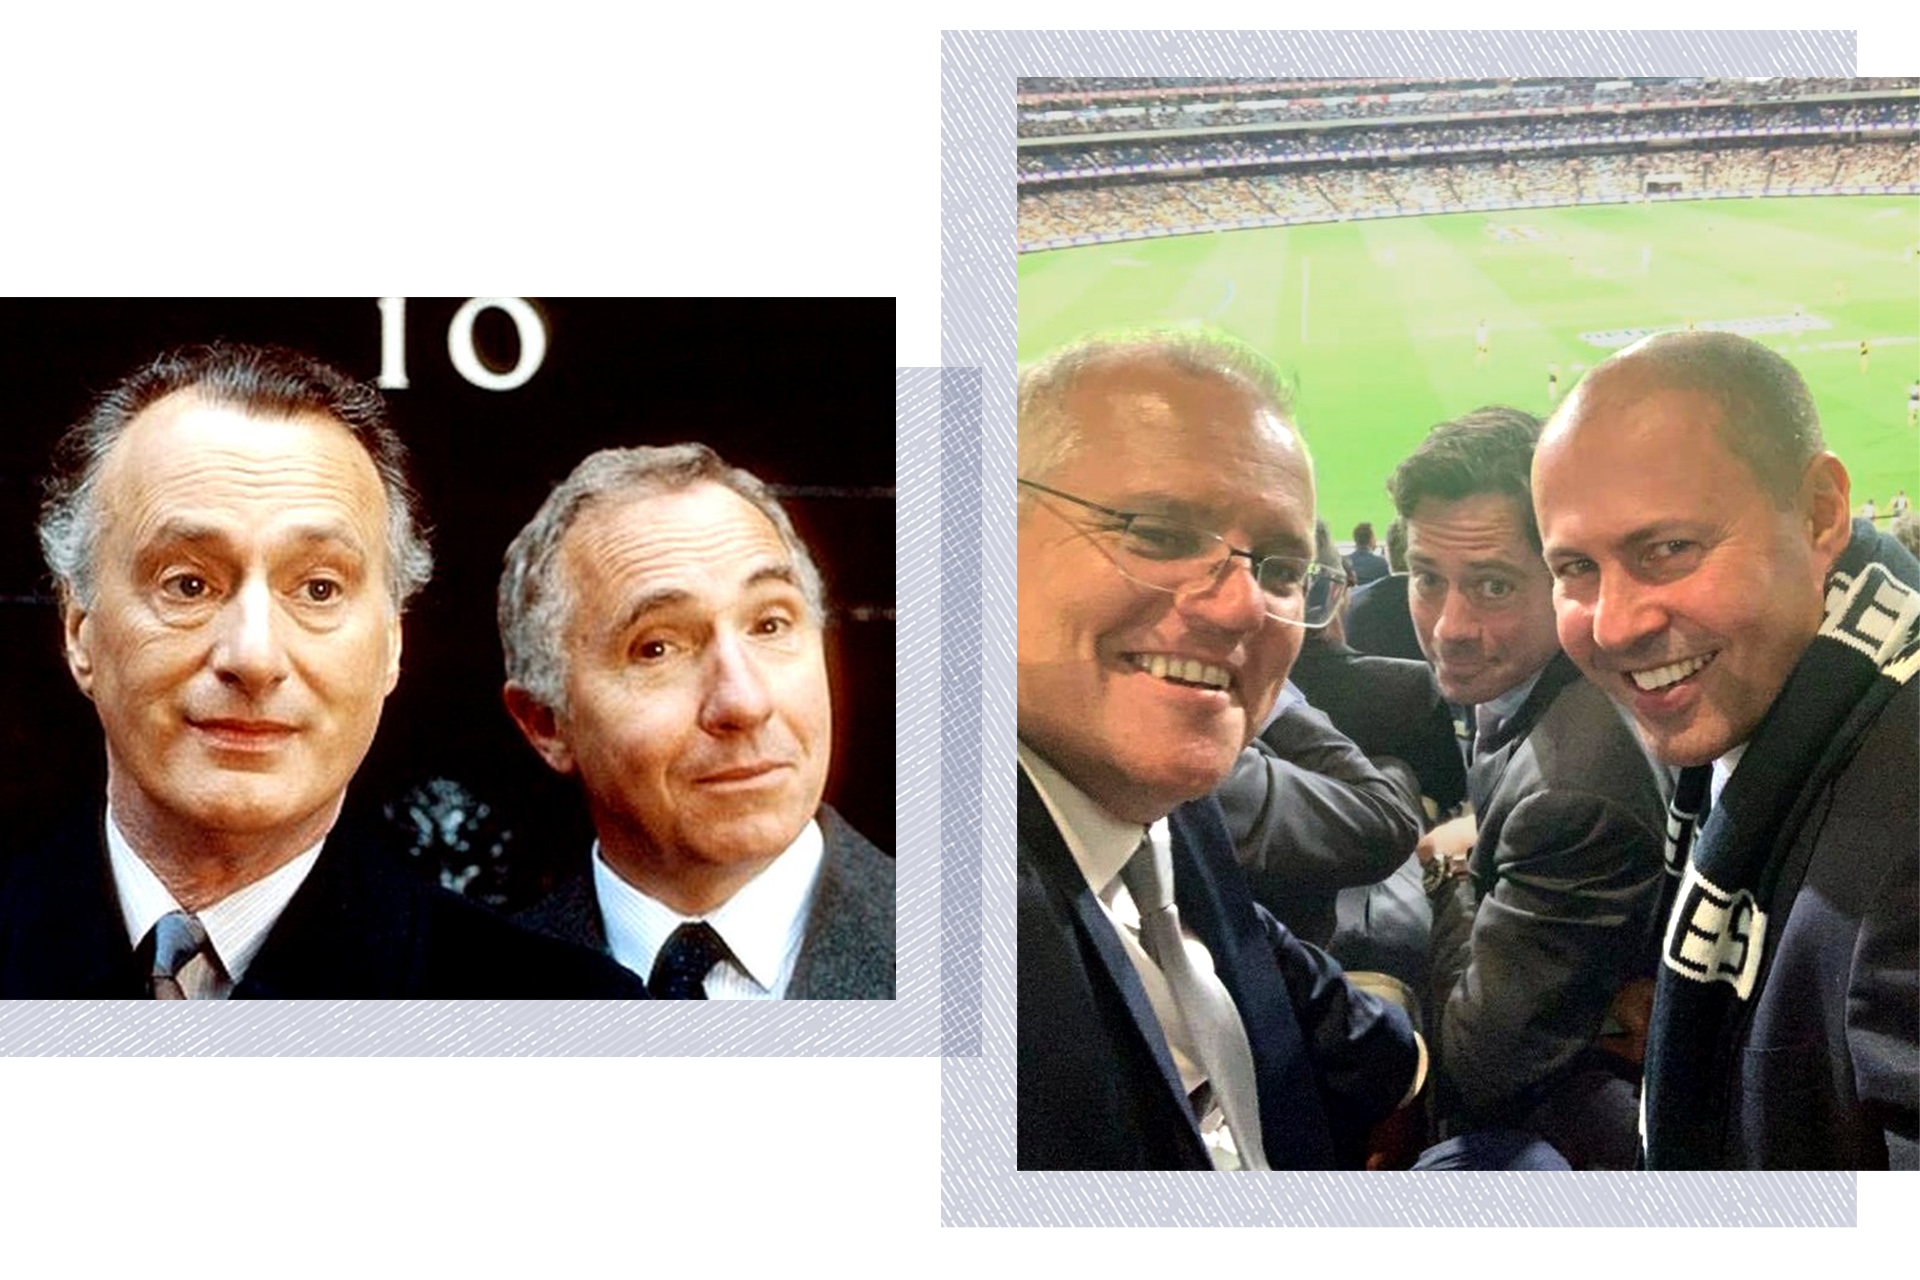 Yes, Prime Minister's James Hacker and Sir Humphrey Appleby, and Scott Morrison and Josh Frydenberg at an AFL game. 